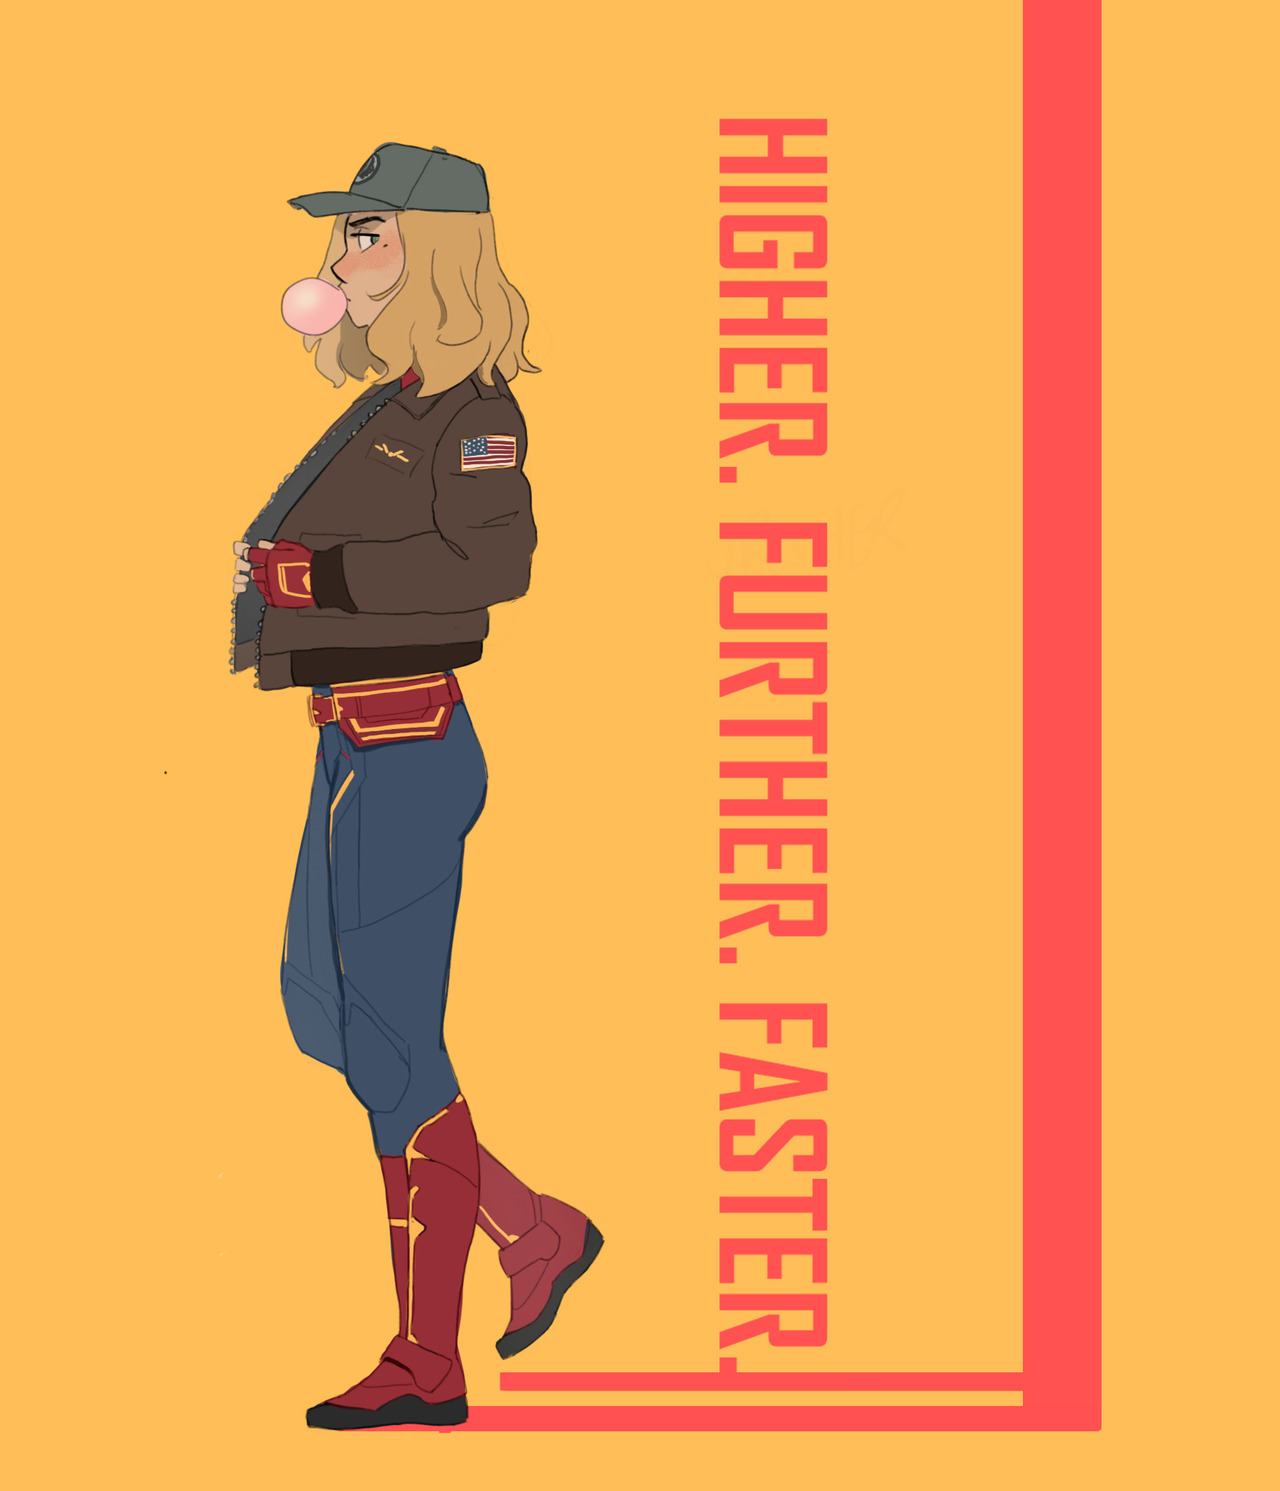 Higher Further Faster Minimal Captain Marvel Wallpapers